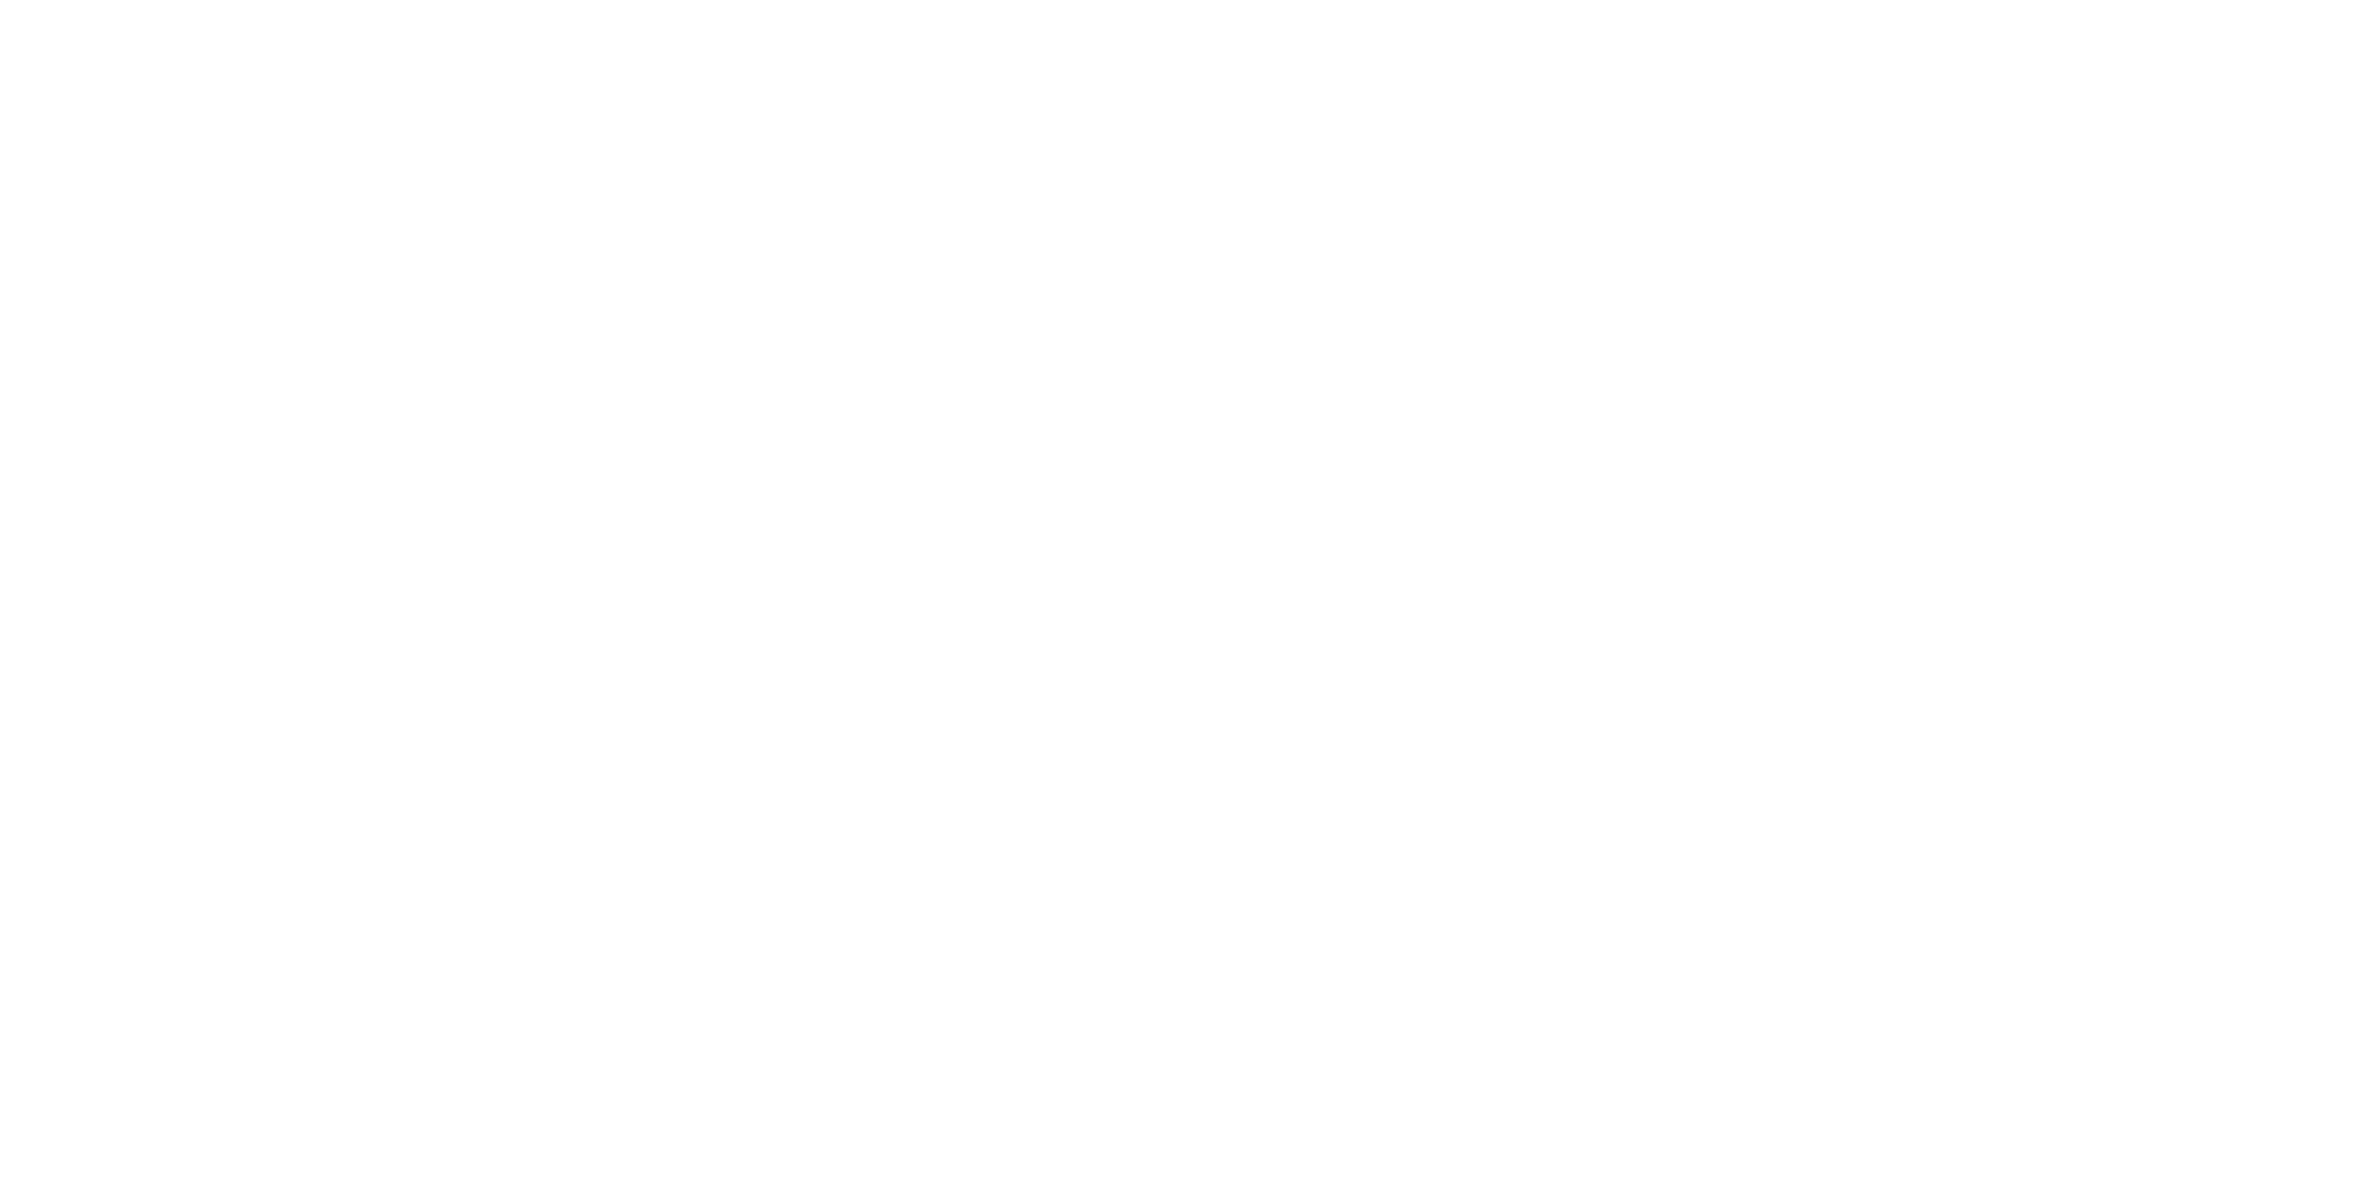 National Careers Week 2020: A Film About HOPE